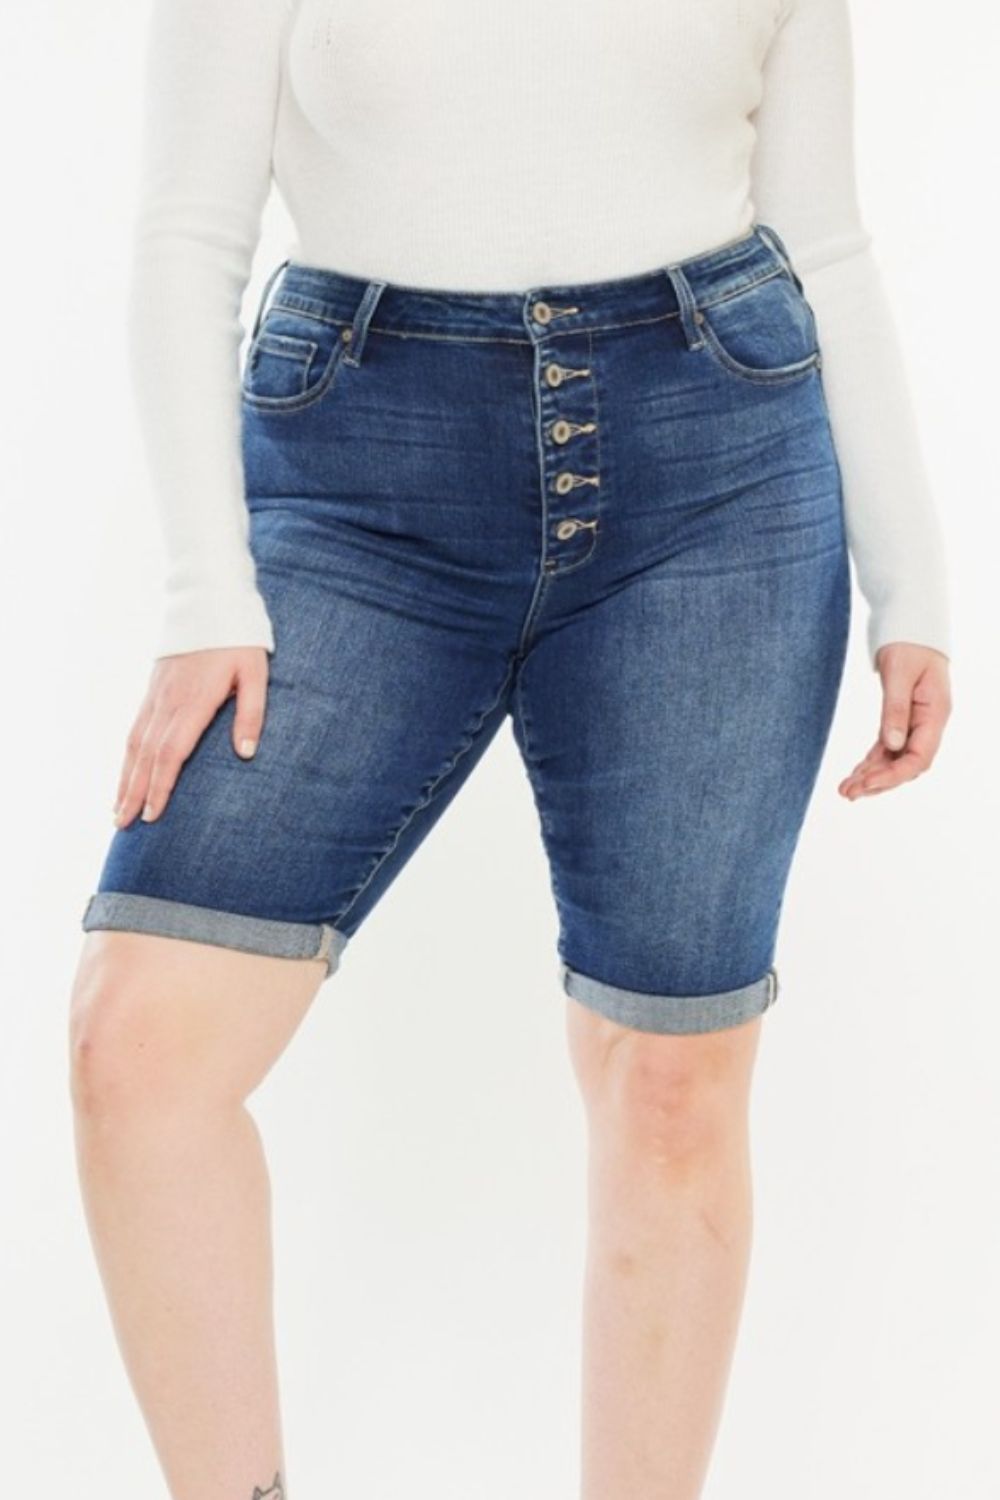 Plus Size Button Fly Denim Shorts Pants Muses Of Bohemia   